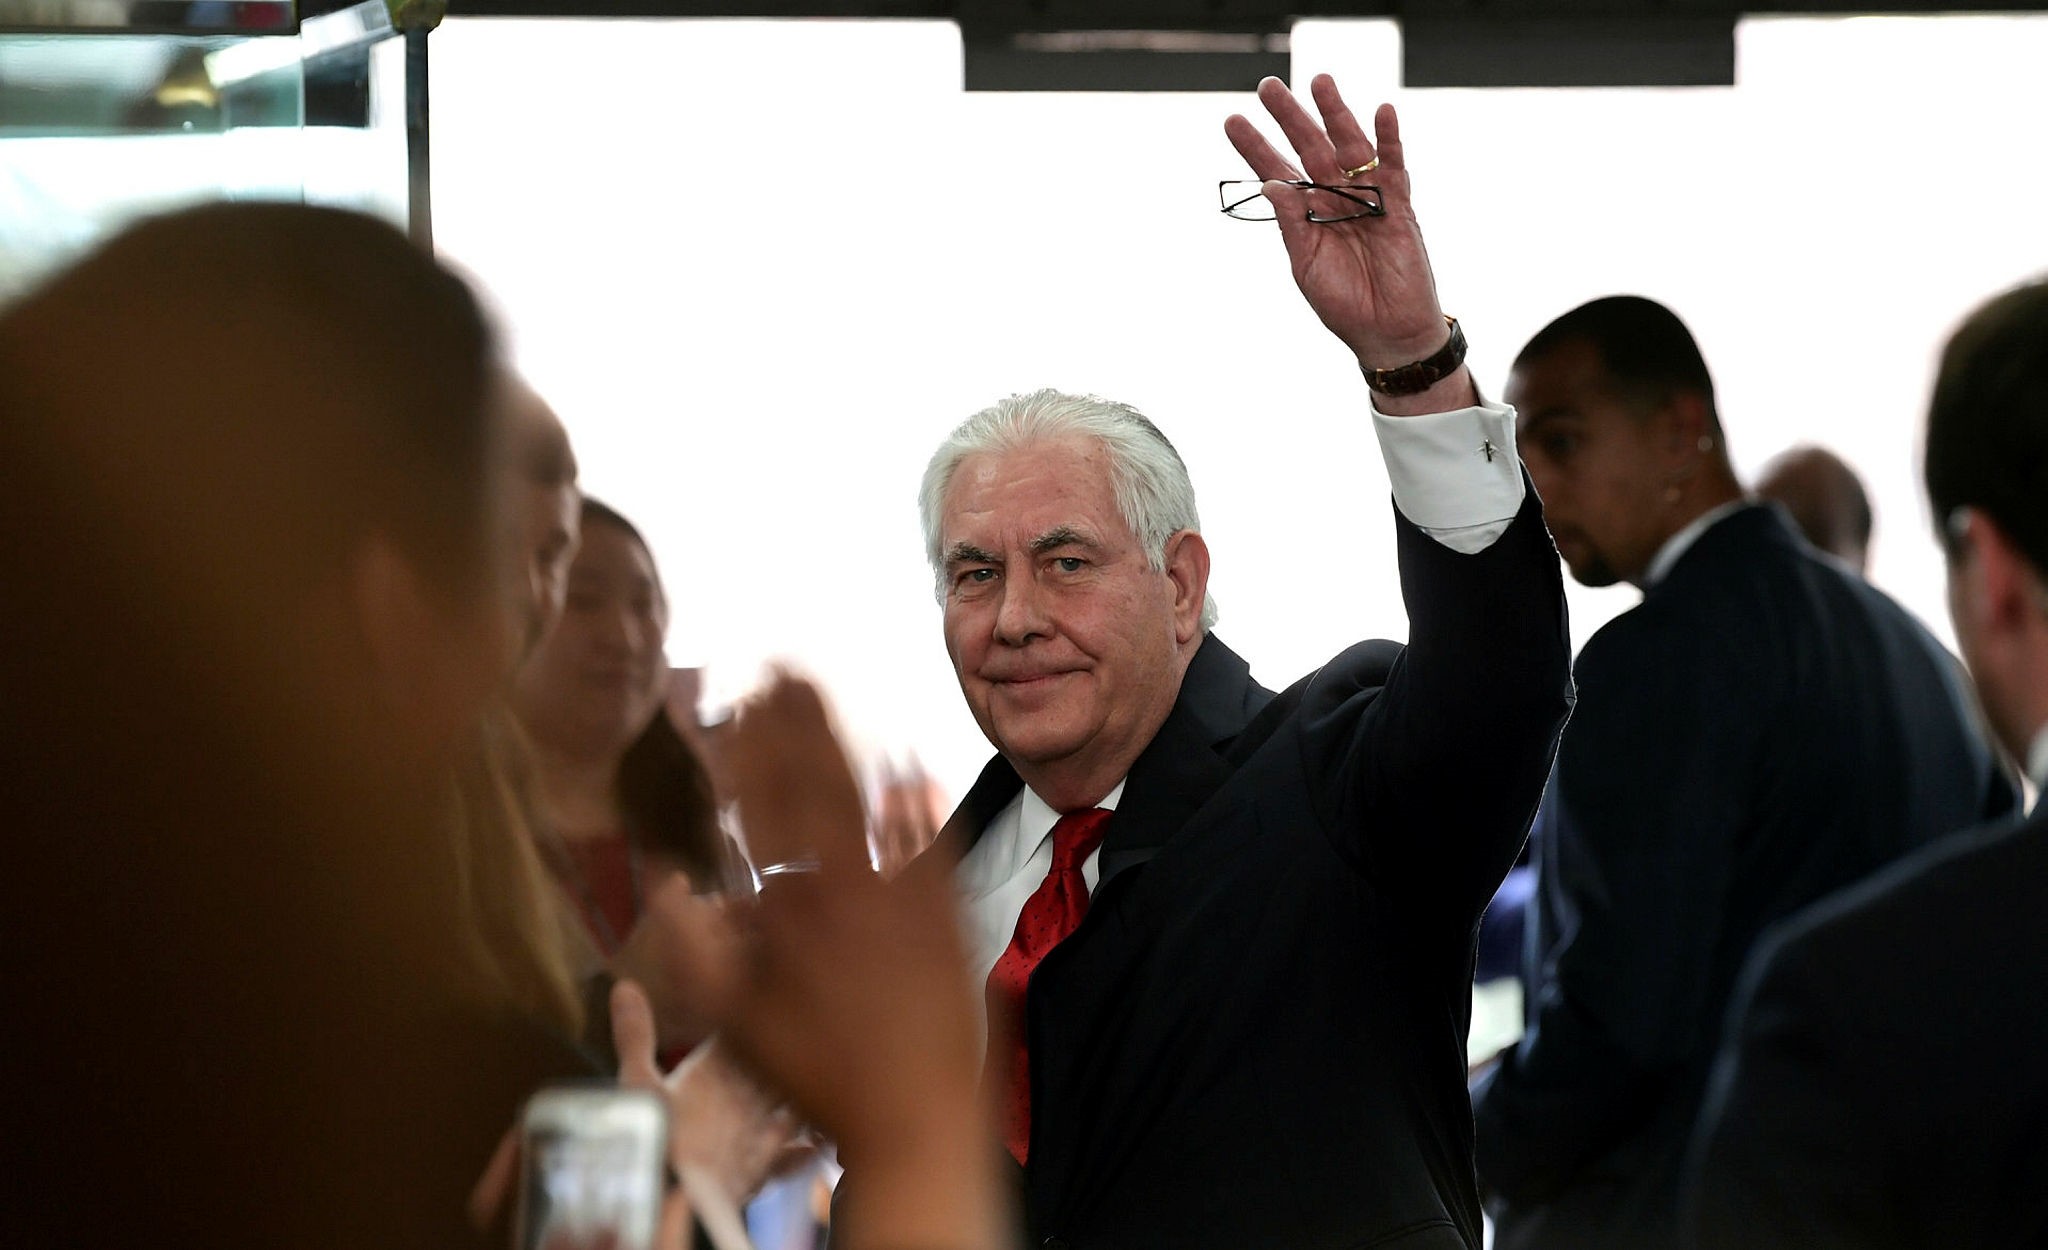 Outgoing Secretary of State Rex Tillerson waves goodbye as he walks out of the doors of the State Department in Washington, Thursday, March 22, 2018, after speaking to employees upon his departure. (AP Photo)